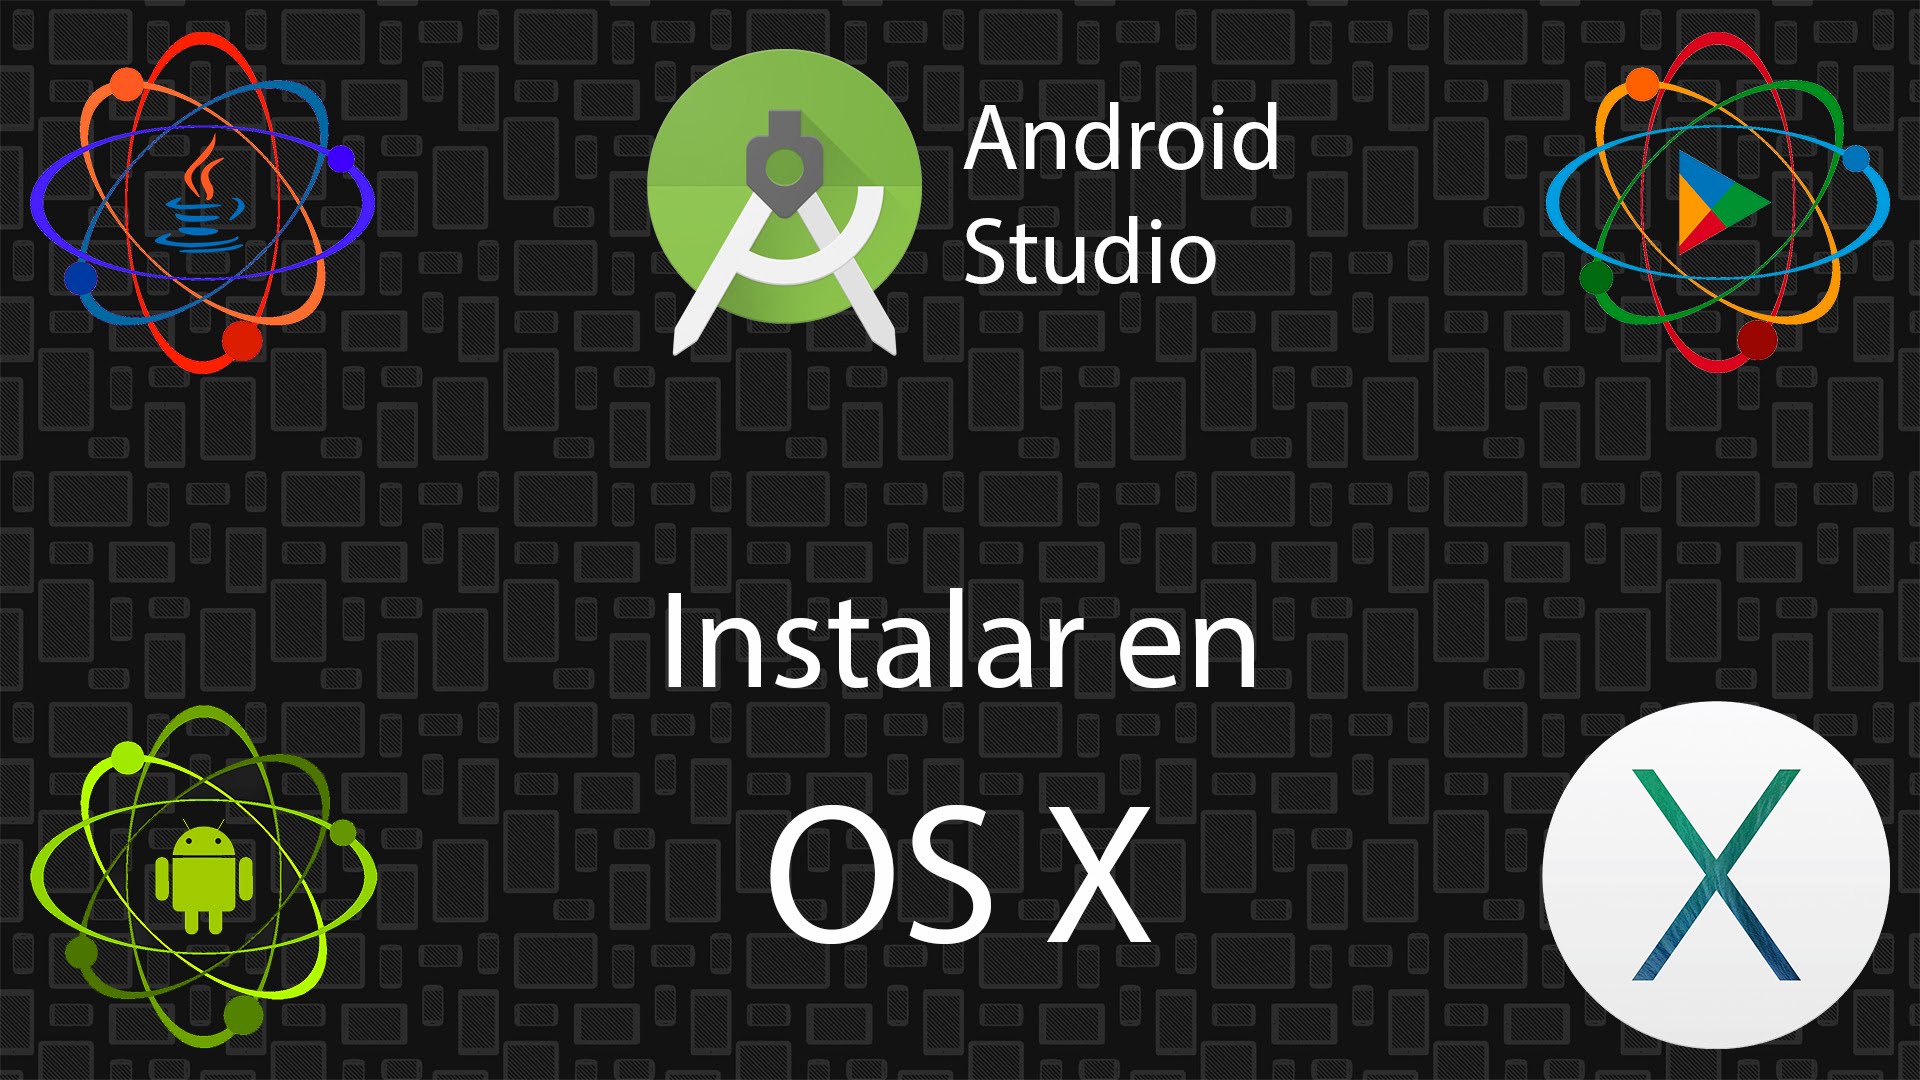 uninstall android studio completely windows